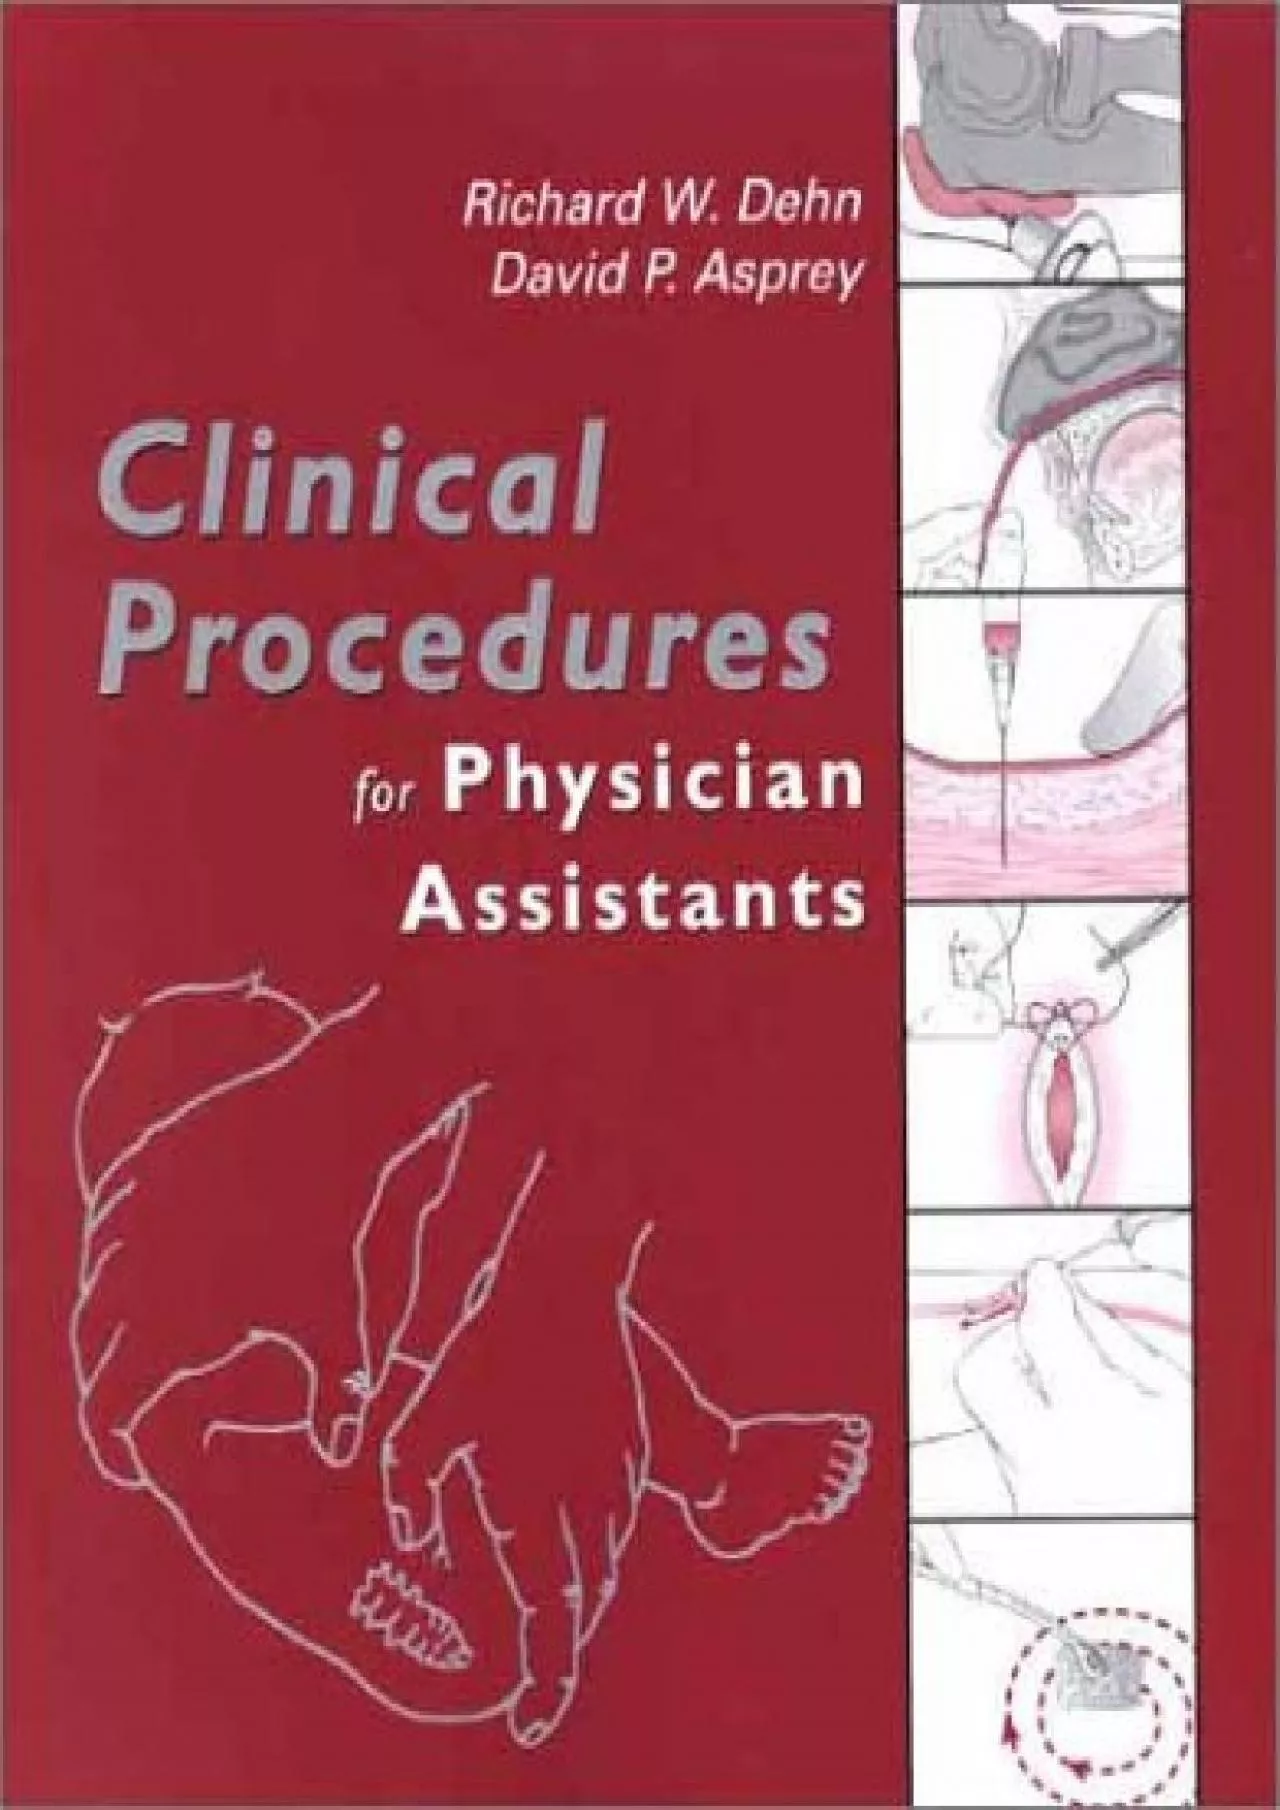 (BOOK)-Clinical Procedures for Physician Assistants: Expert Consult - Online and Print